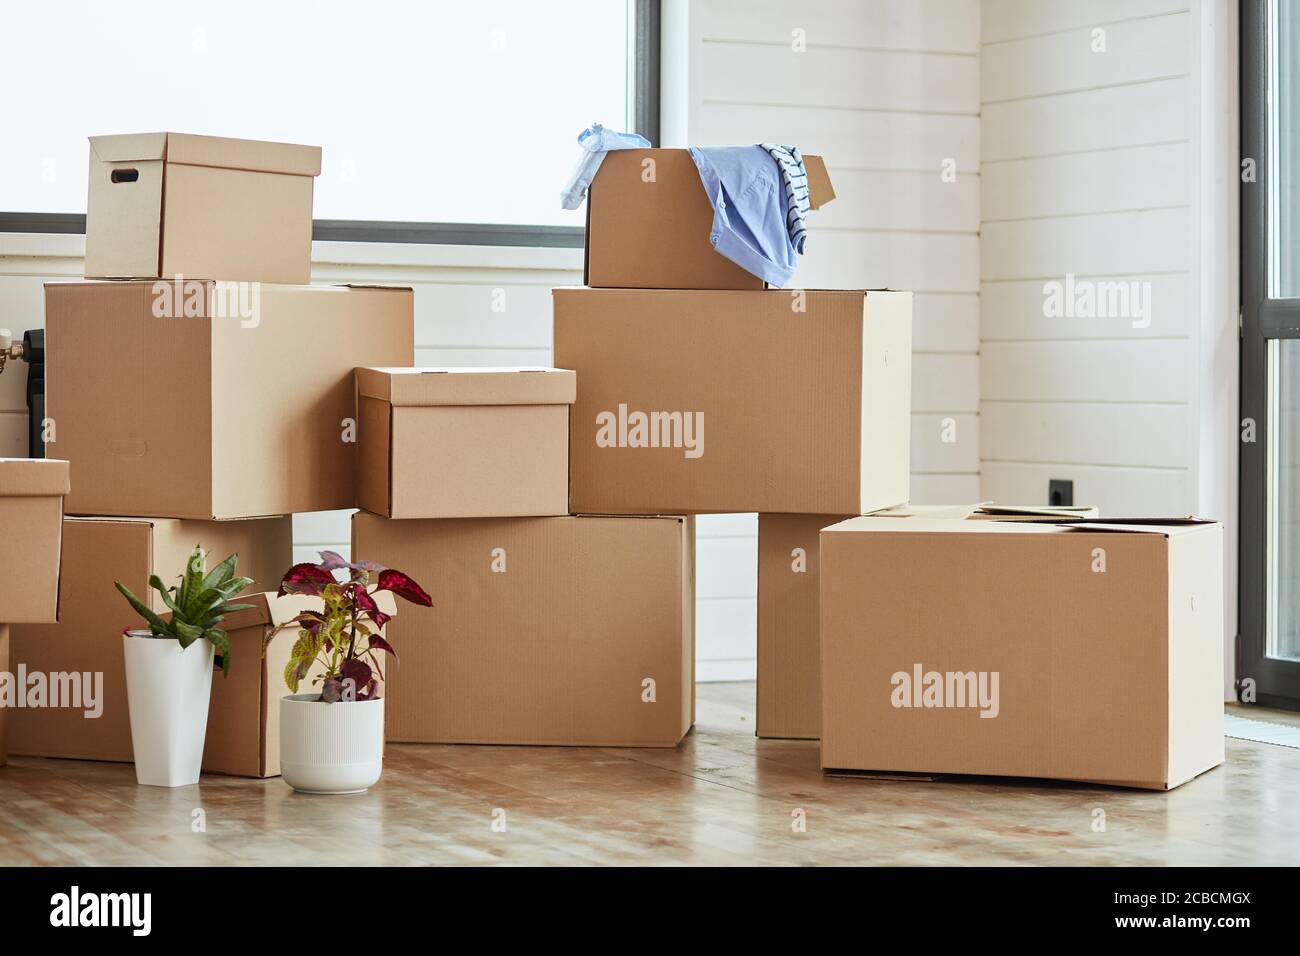 https://c8.alamy.com/comp/2CBCMGX/twelve-carton-boxes-with-household-stuff-in-light-living-room-on-moving-day-two-flowers-in-pots-on-left-side-2CBCMGX.jpg